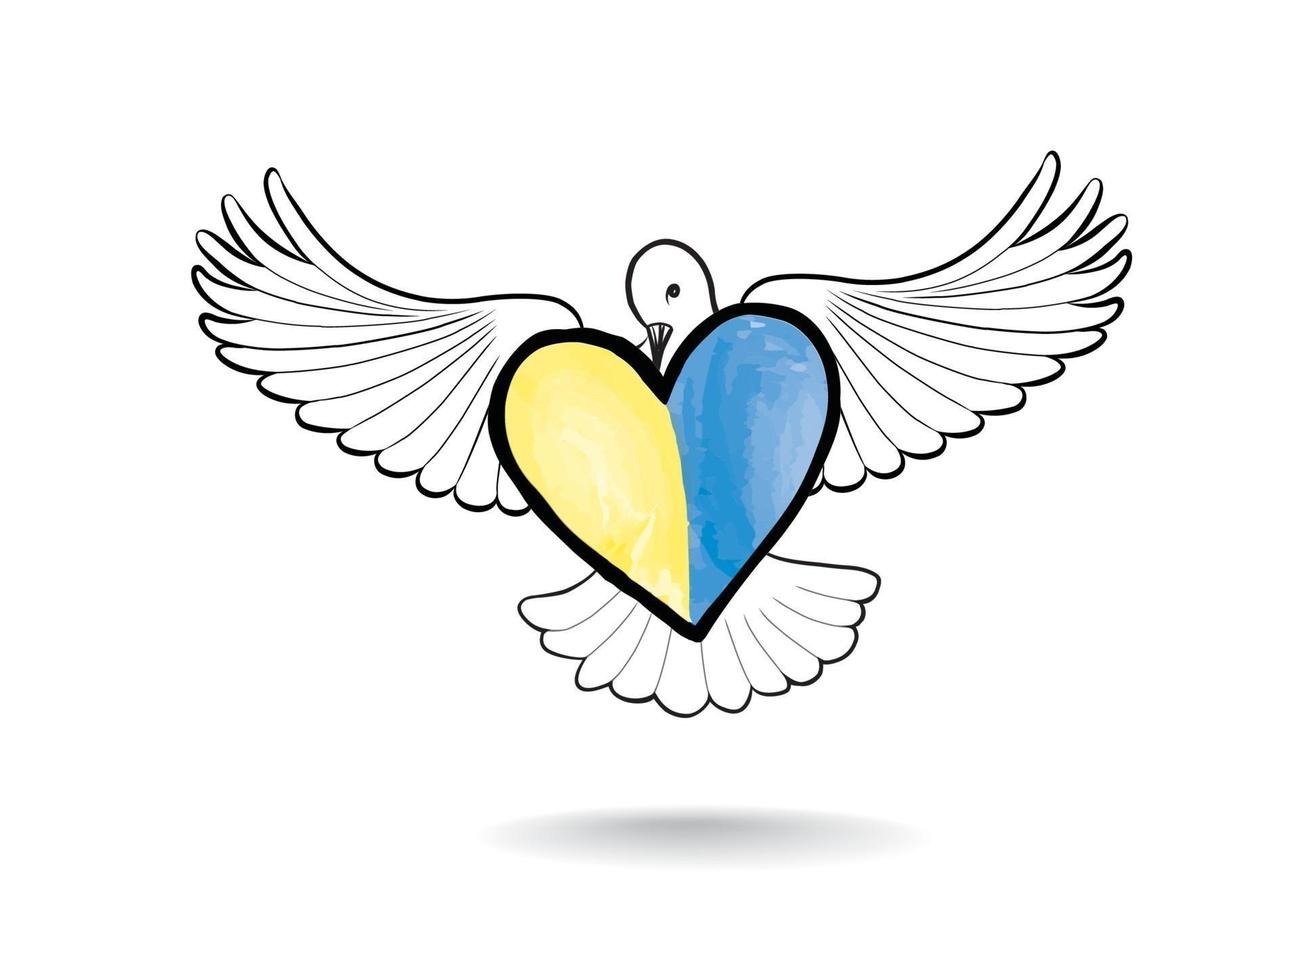 Ukraine flag with peace dove symbols. Stay with peace. Flag of Ukraine with shape of a dove of peace. The concept of no war, peace in Ukraine. vector